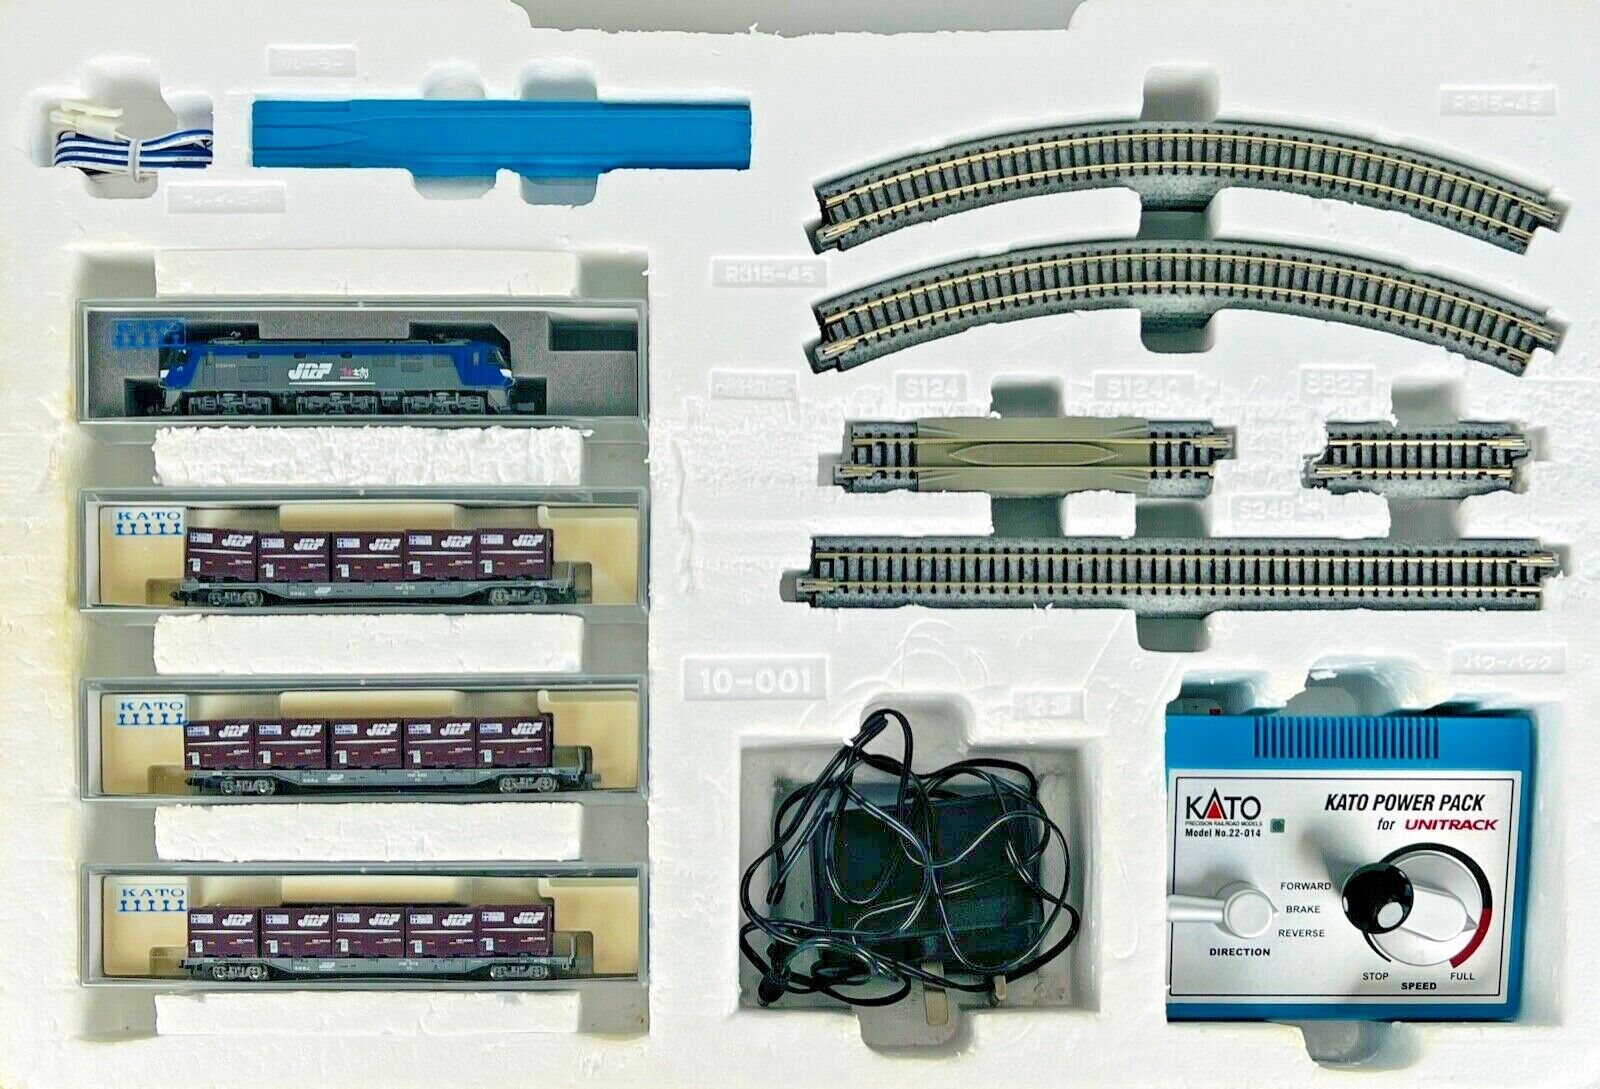 KATO N GAUGE - 10-010 - MASTER 1 EF210 LOCO & CONTAINER FREIGHT START SET BOXED